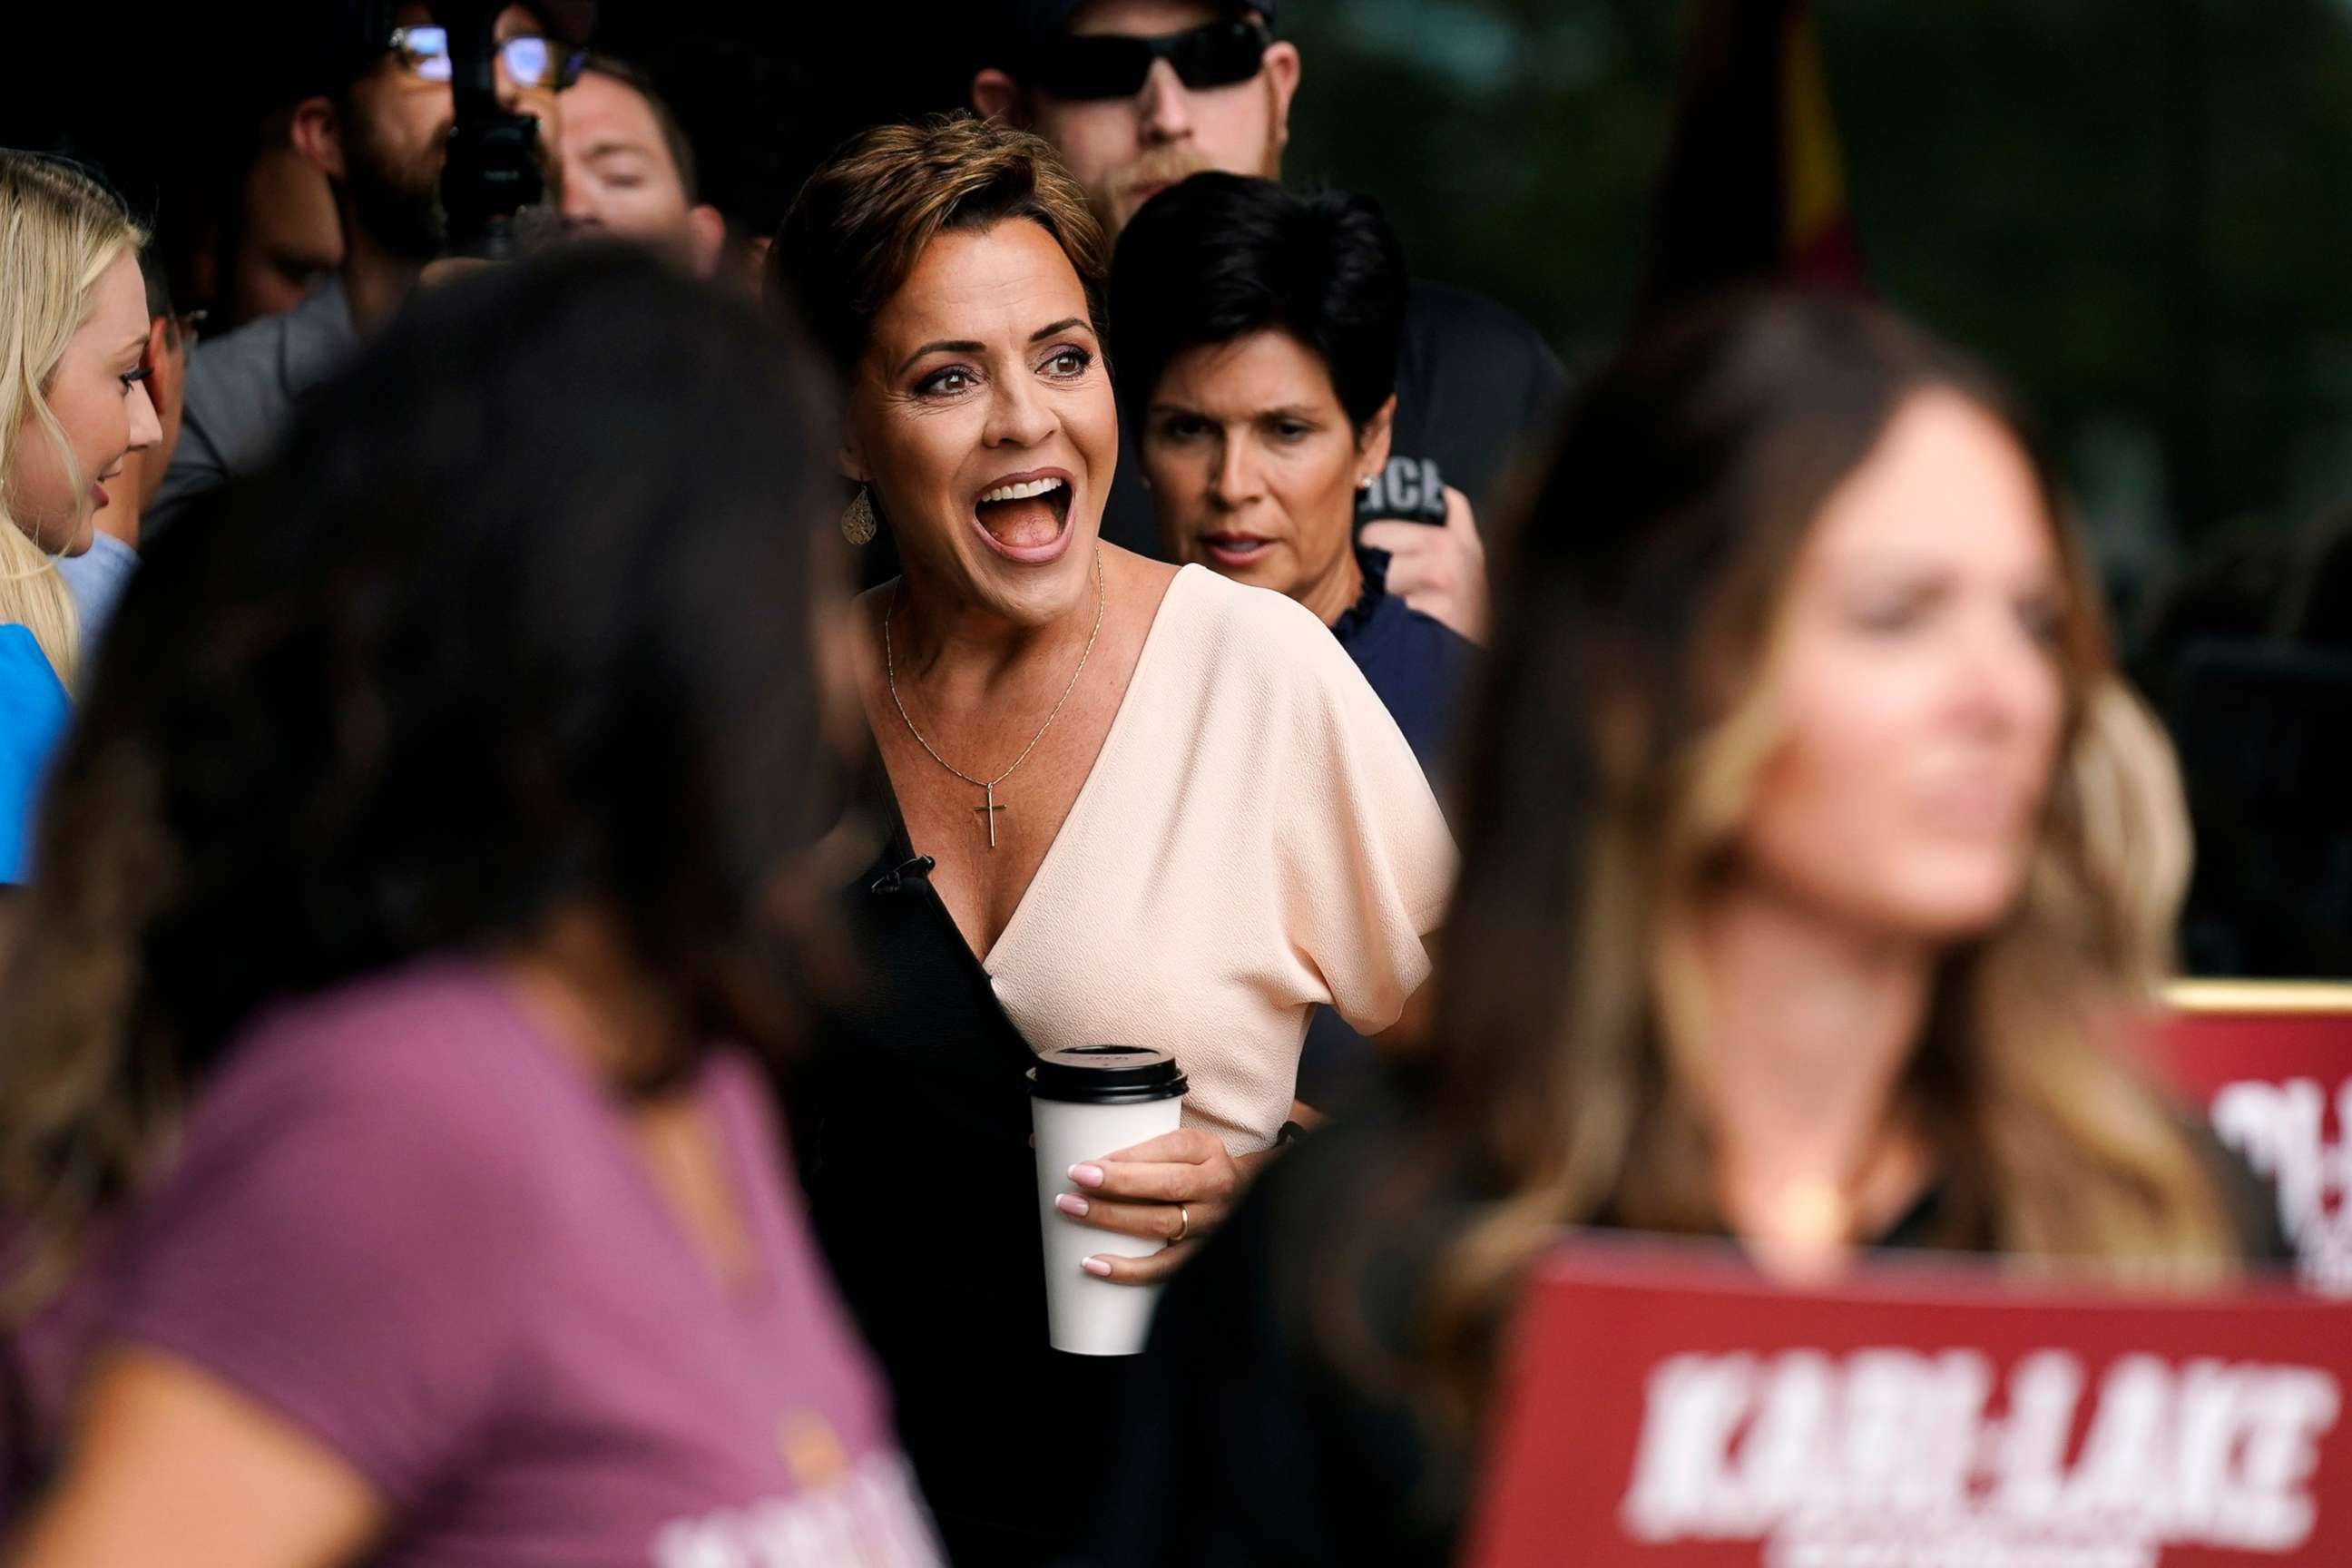 PHOTO: Kari Lake, Republican candidate for Arizona governor, smiles at supporters as she arrives to speak at a post-election news conference in Phoenix, Ariz., Aug. 3, 2022.